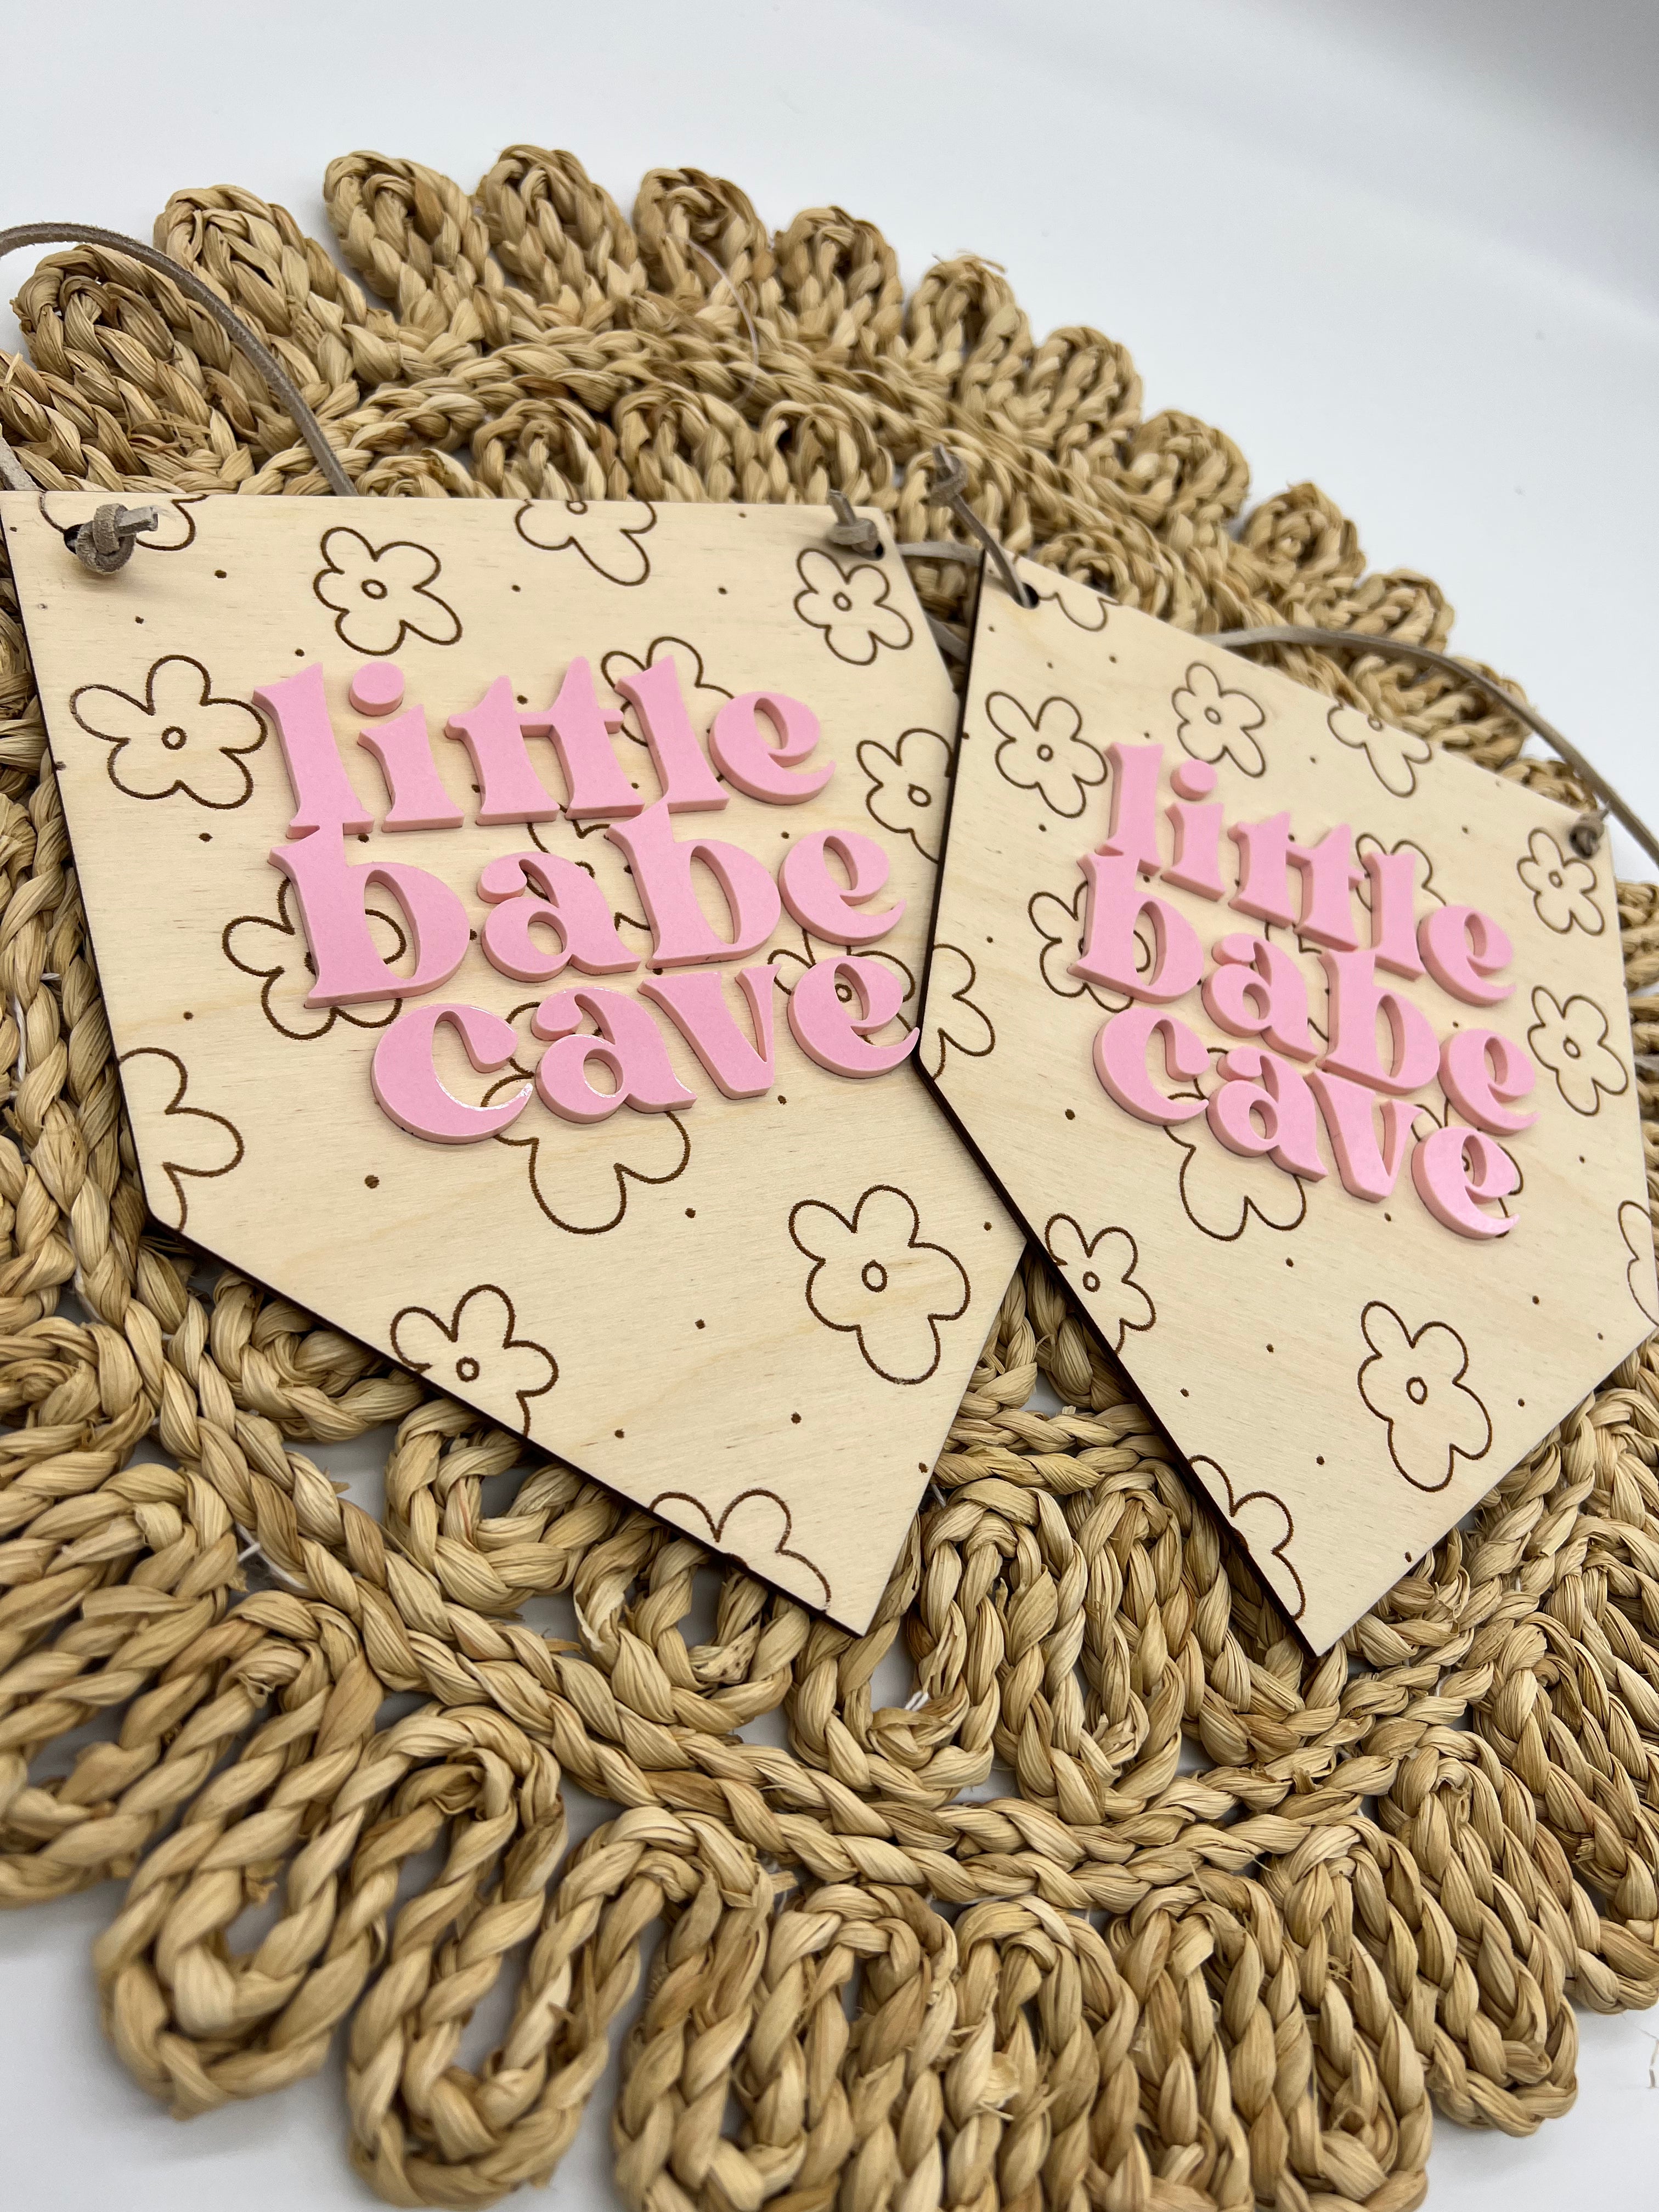 Little Babe Cave Banner Sign